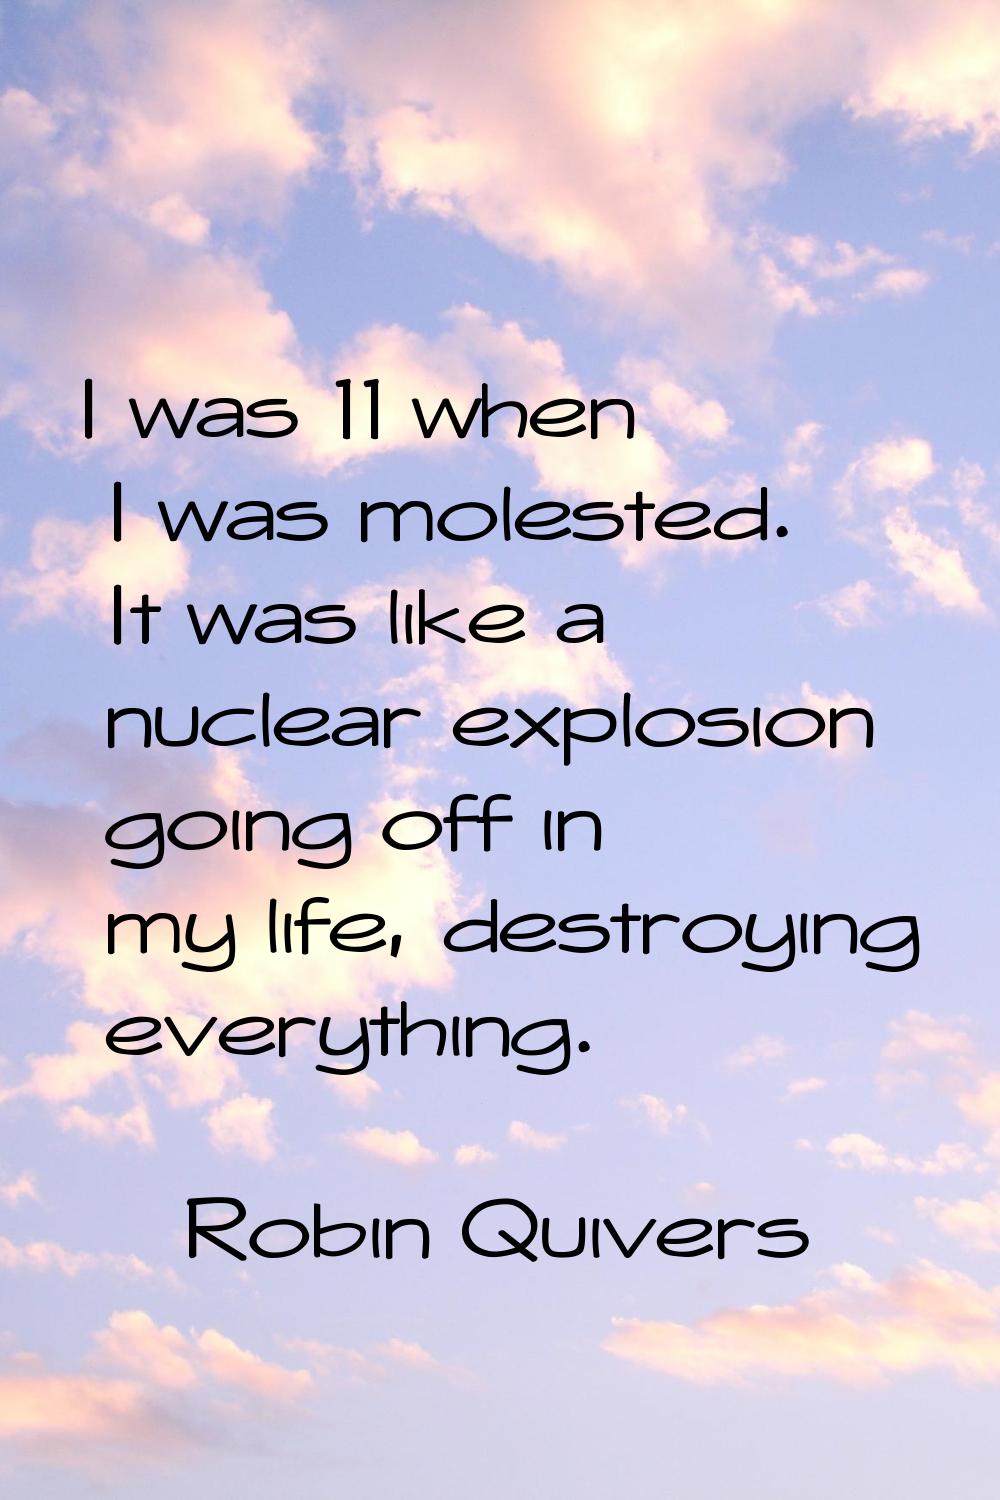 I was 11 when I was molested. It was like a nuclear explosion going off in my life, destroying ever